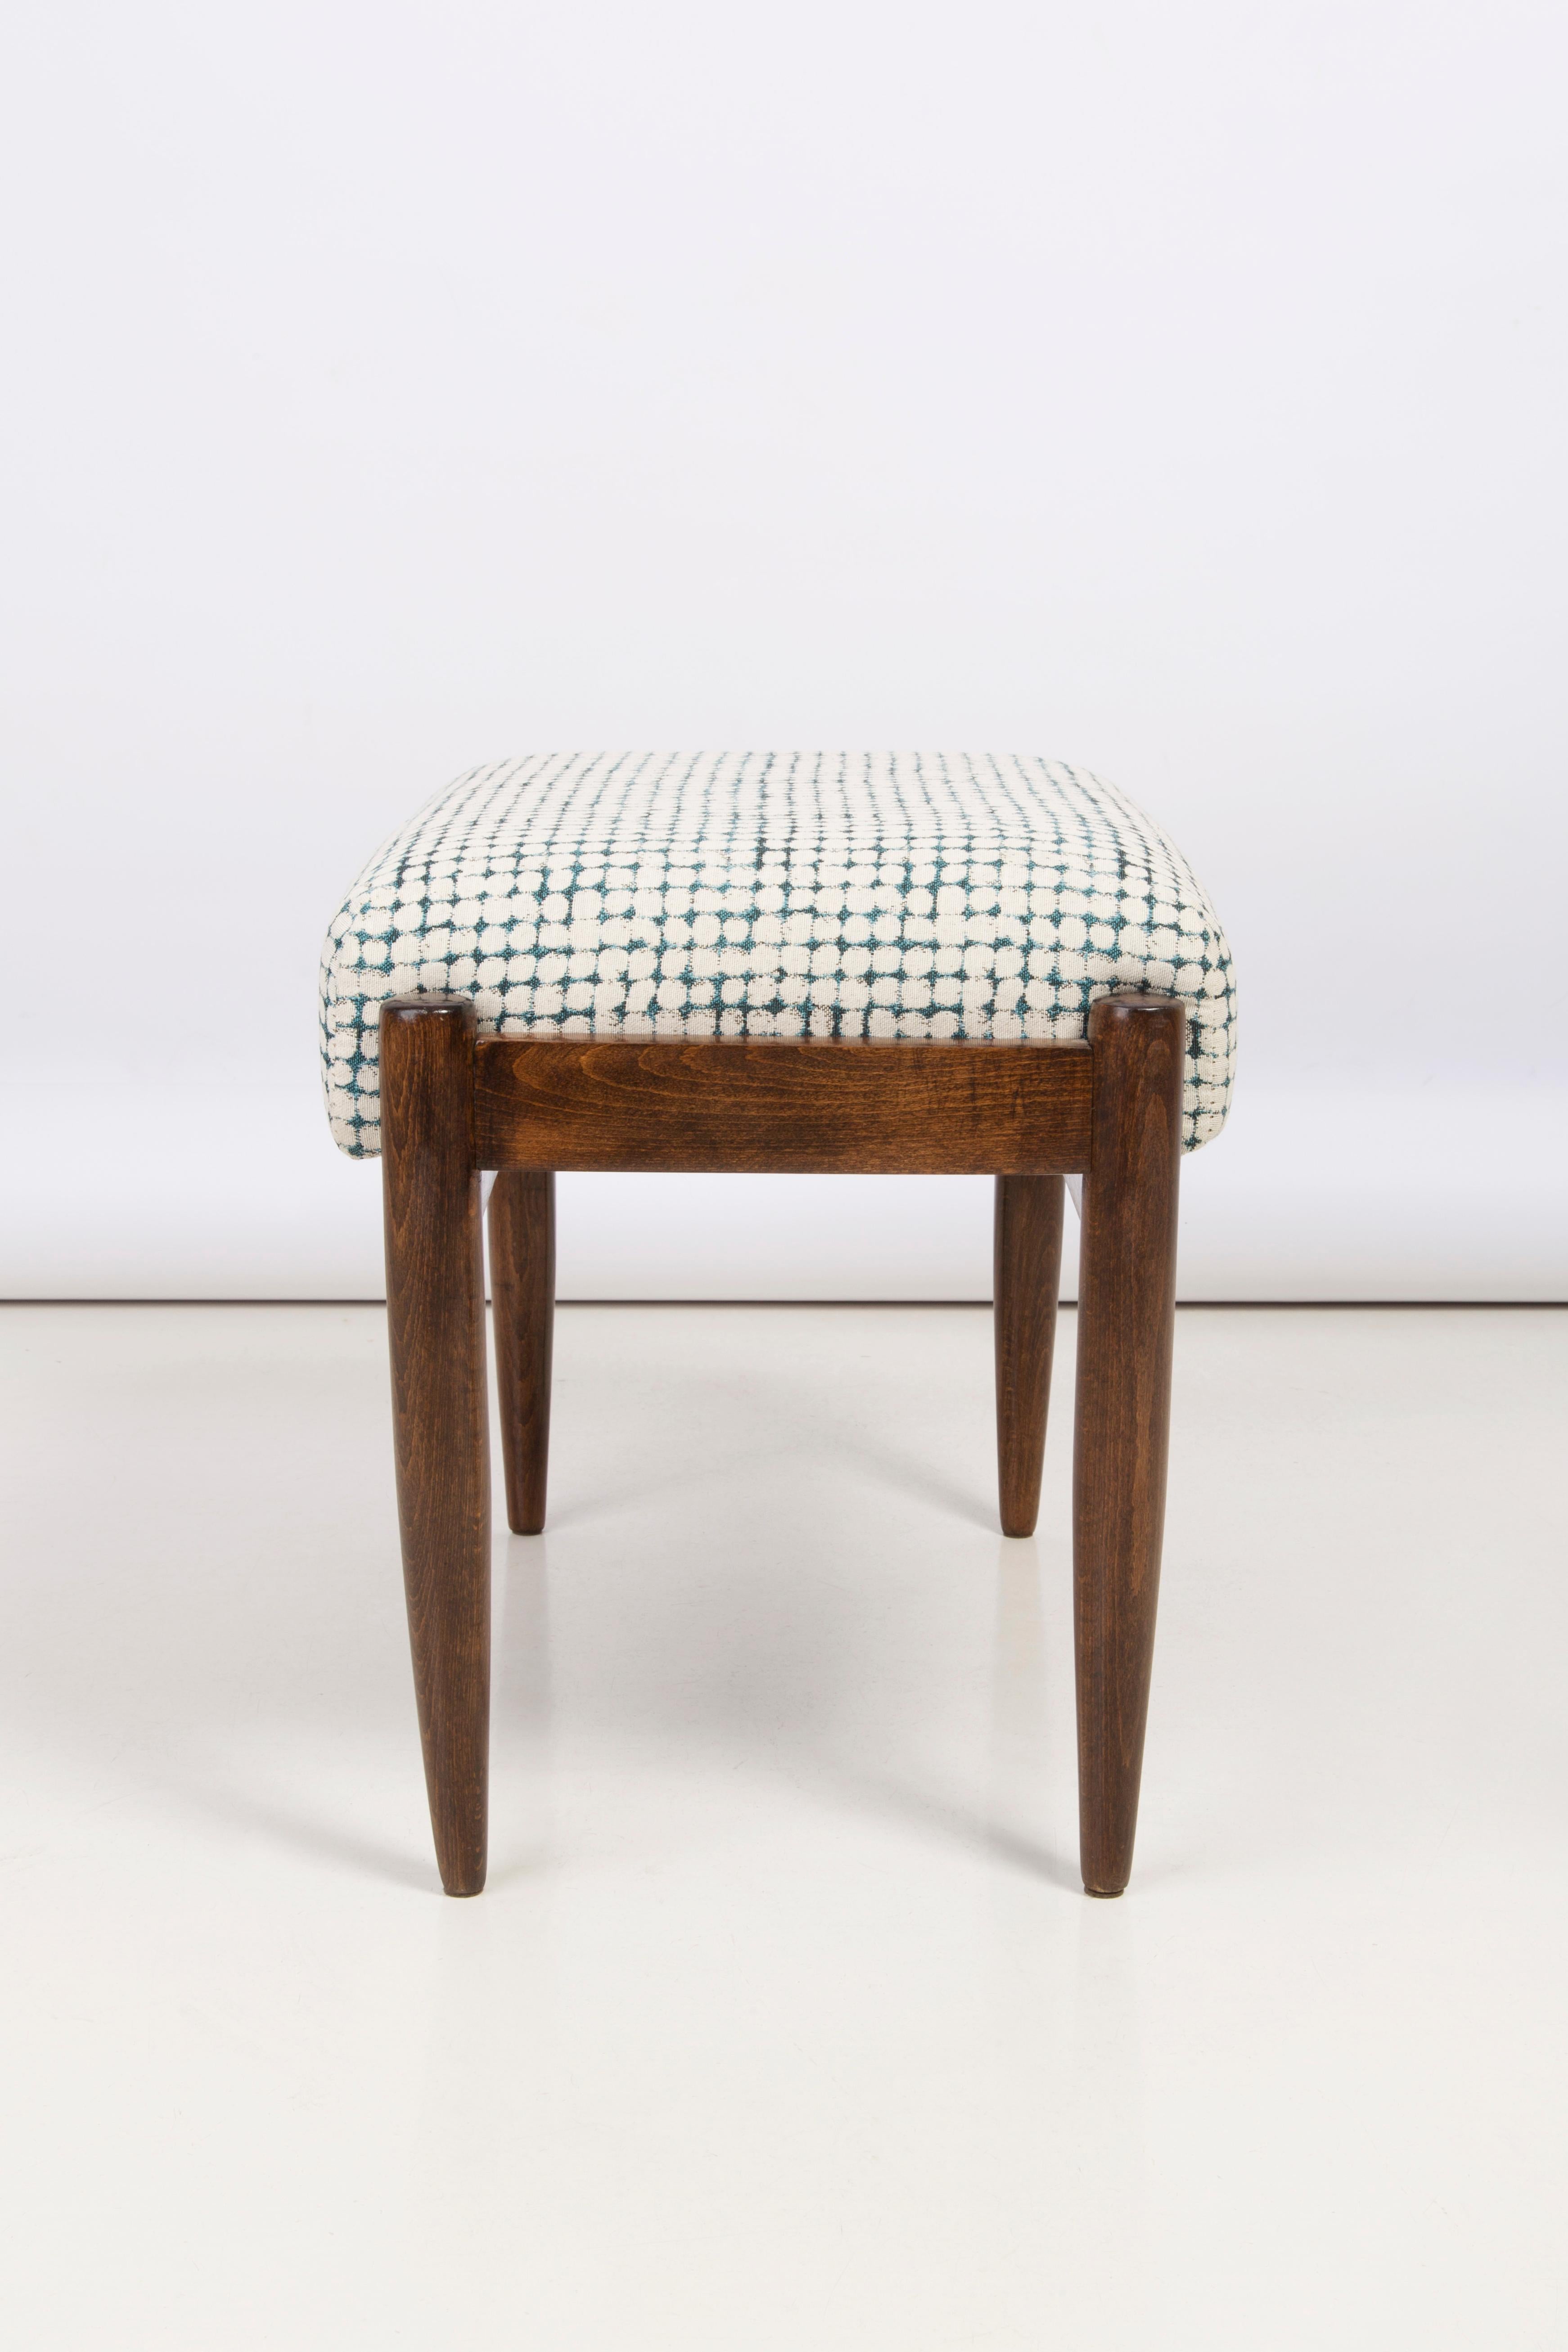 White and Aqua Vintage Armchair and Stool, Edmund Homa, 1960s For Sale 8